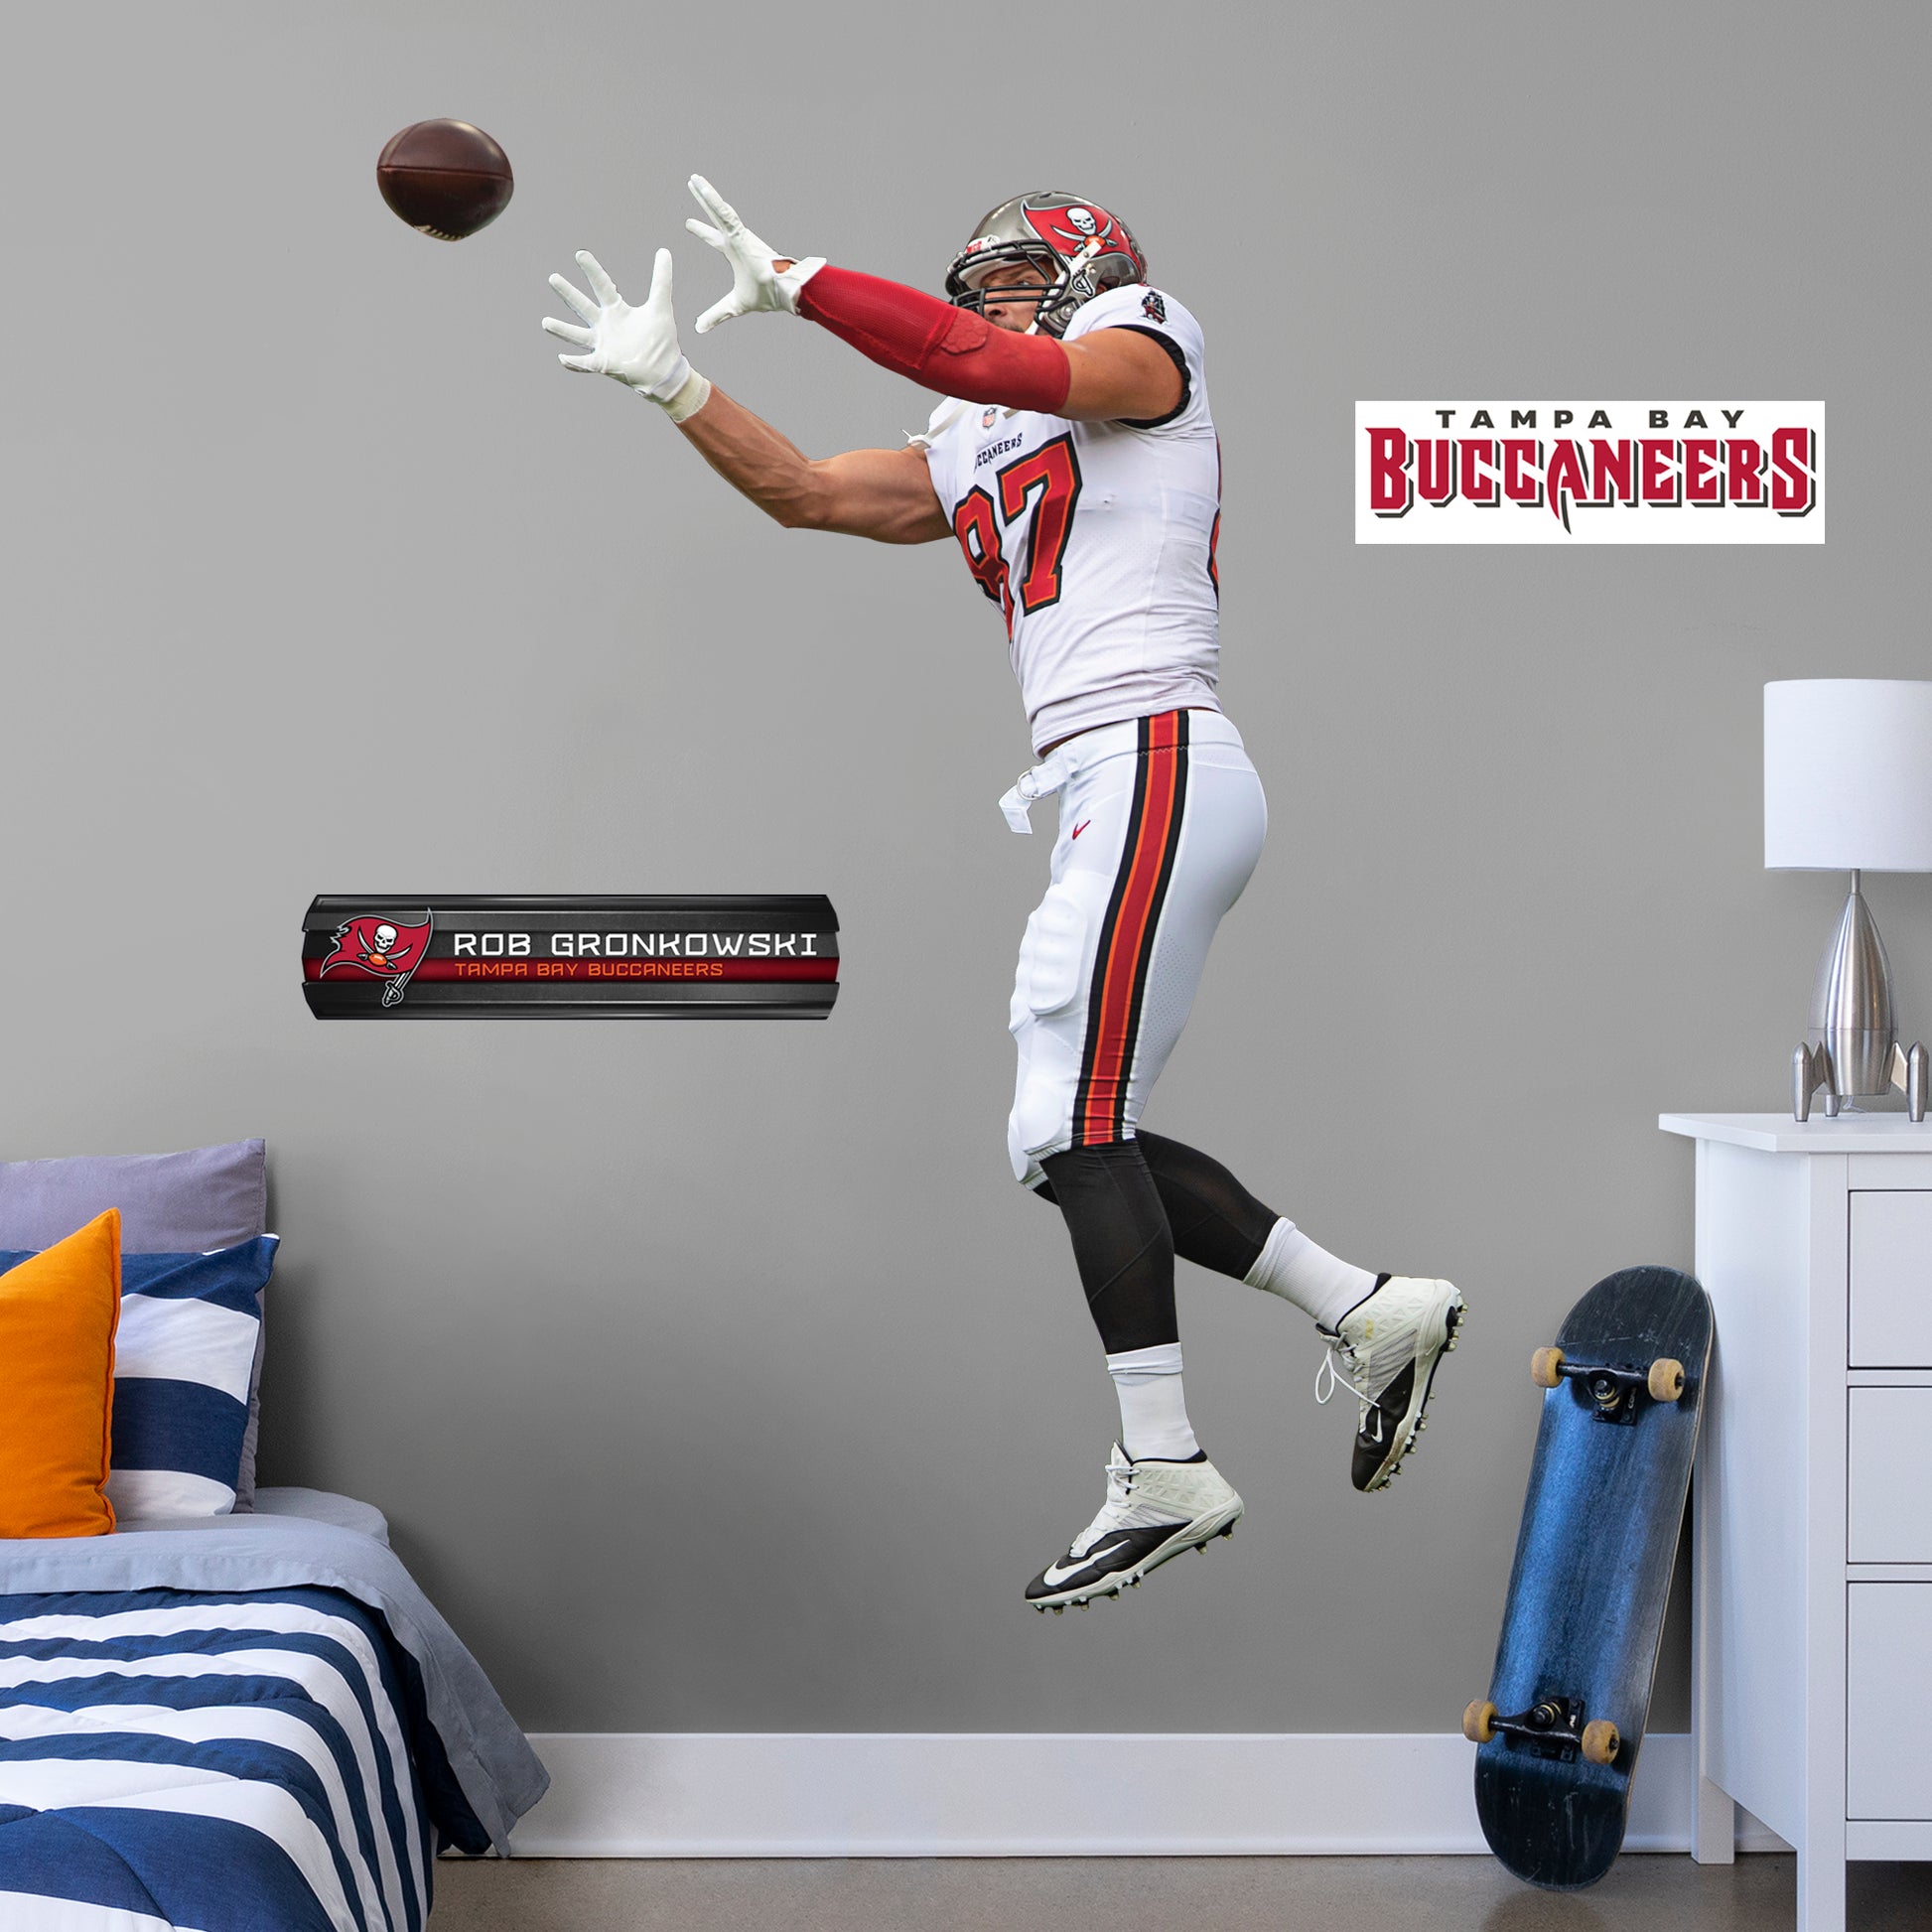 Life-Size Athlete + 3 Decals Bring the action of the NFL into your home with a wall decal of Rob Gronkowski! High quality, durable, and tear resistant, you'll be able to stick and move it as many times as you want to create the ultimate football experience in any room!